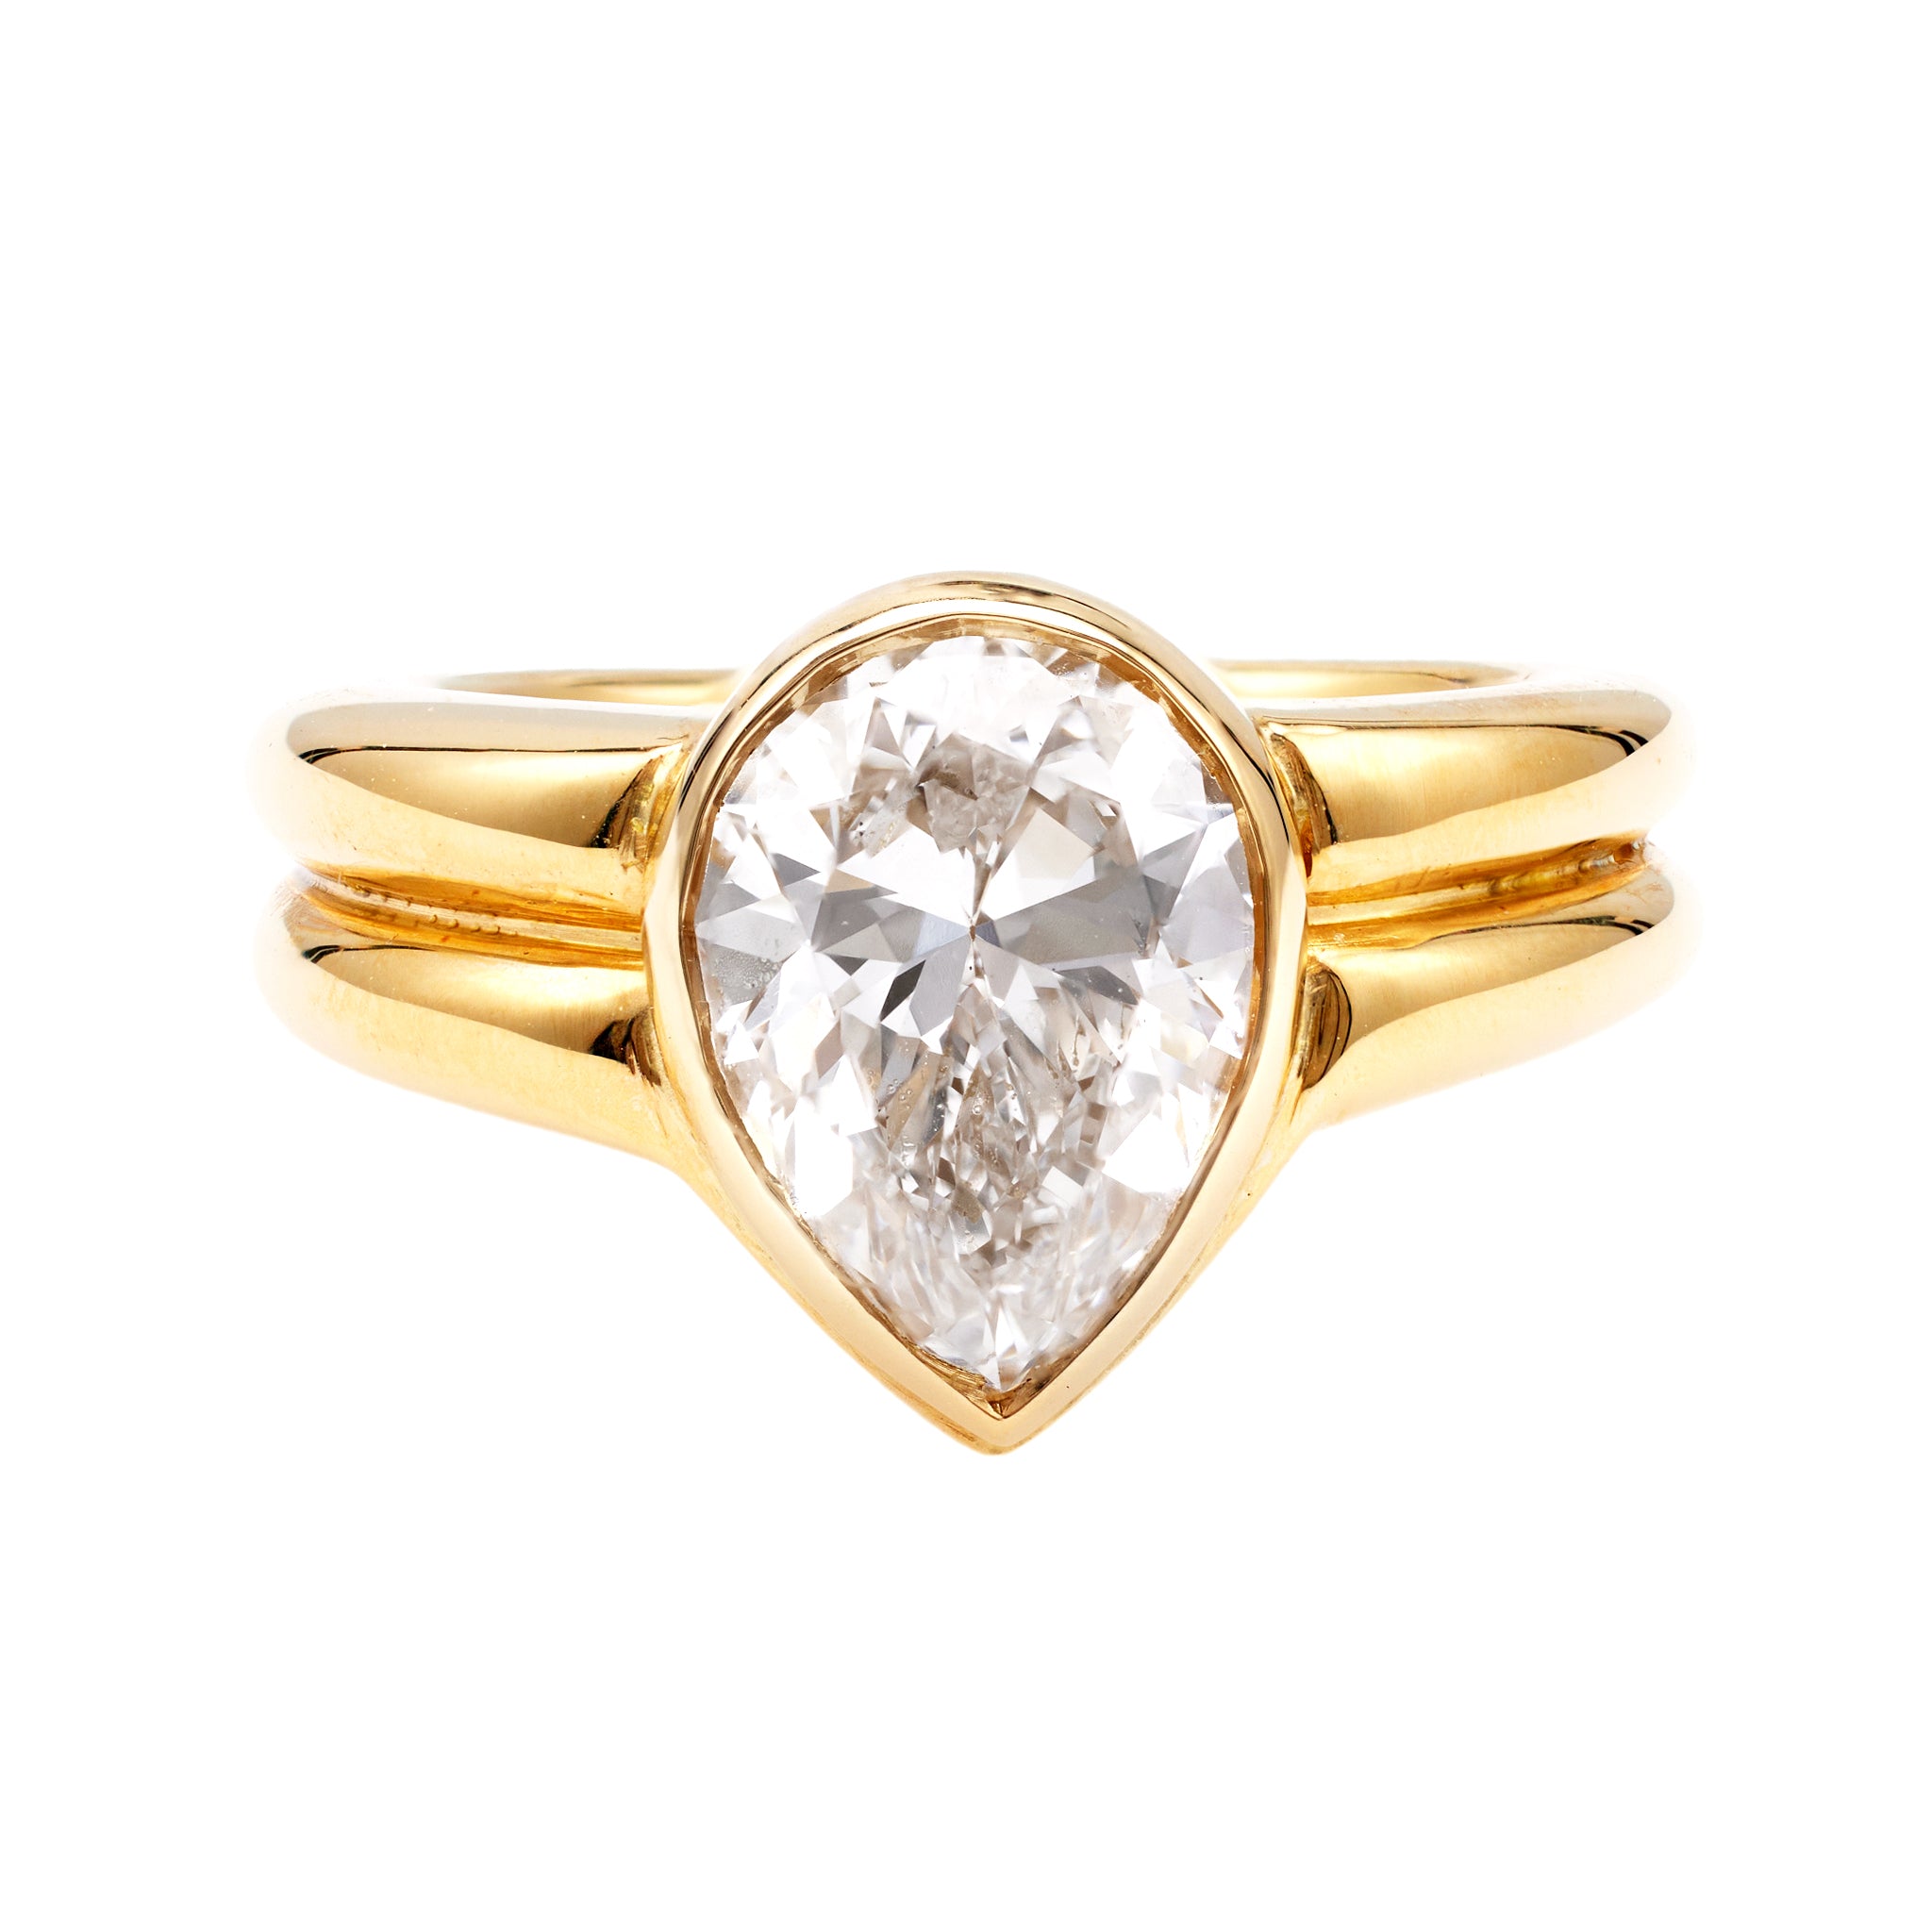 Vintage French GIA 2.85 Carat Pear Cut Diamond 18k Yellow Gold Ring Rings Jack Weir & Sons   